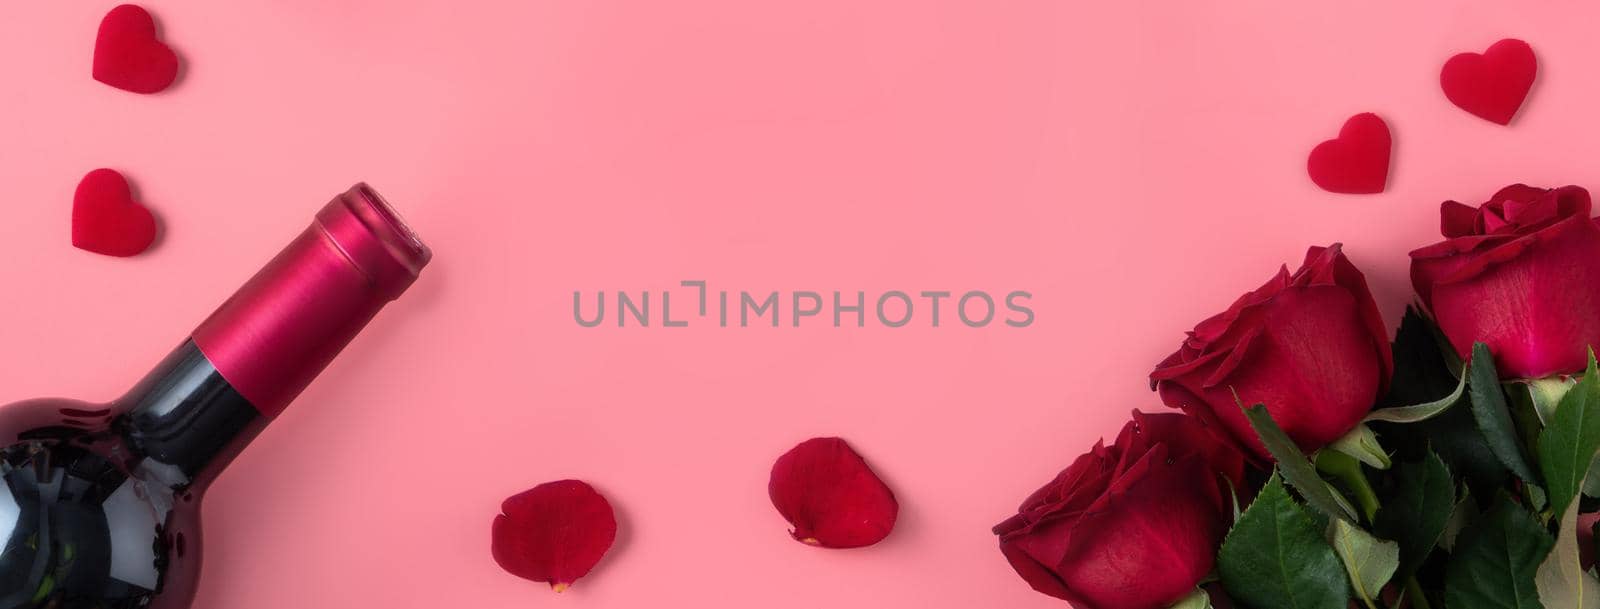 Valentine's Day dating gift with wine and rose concept on pink background by ROMIXIMAGE